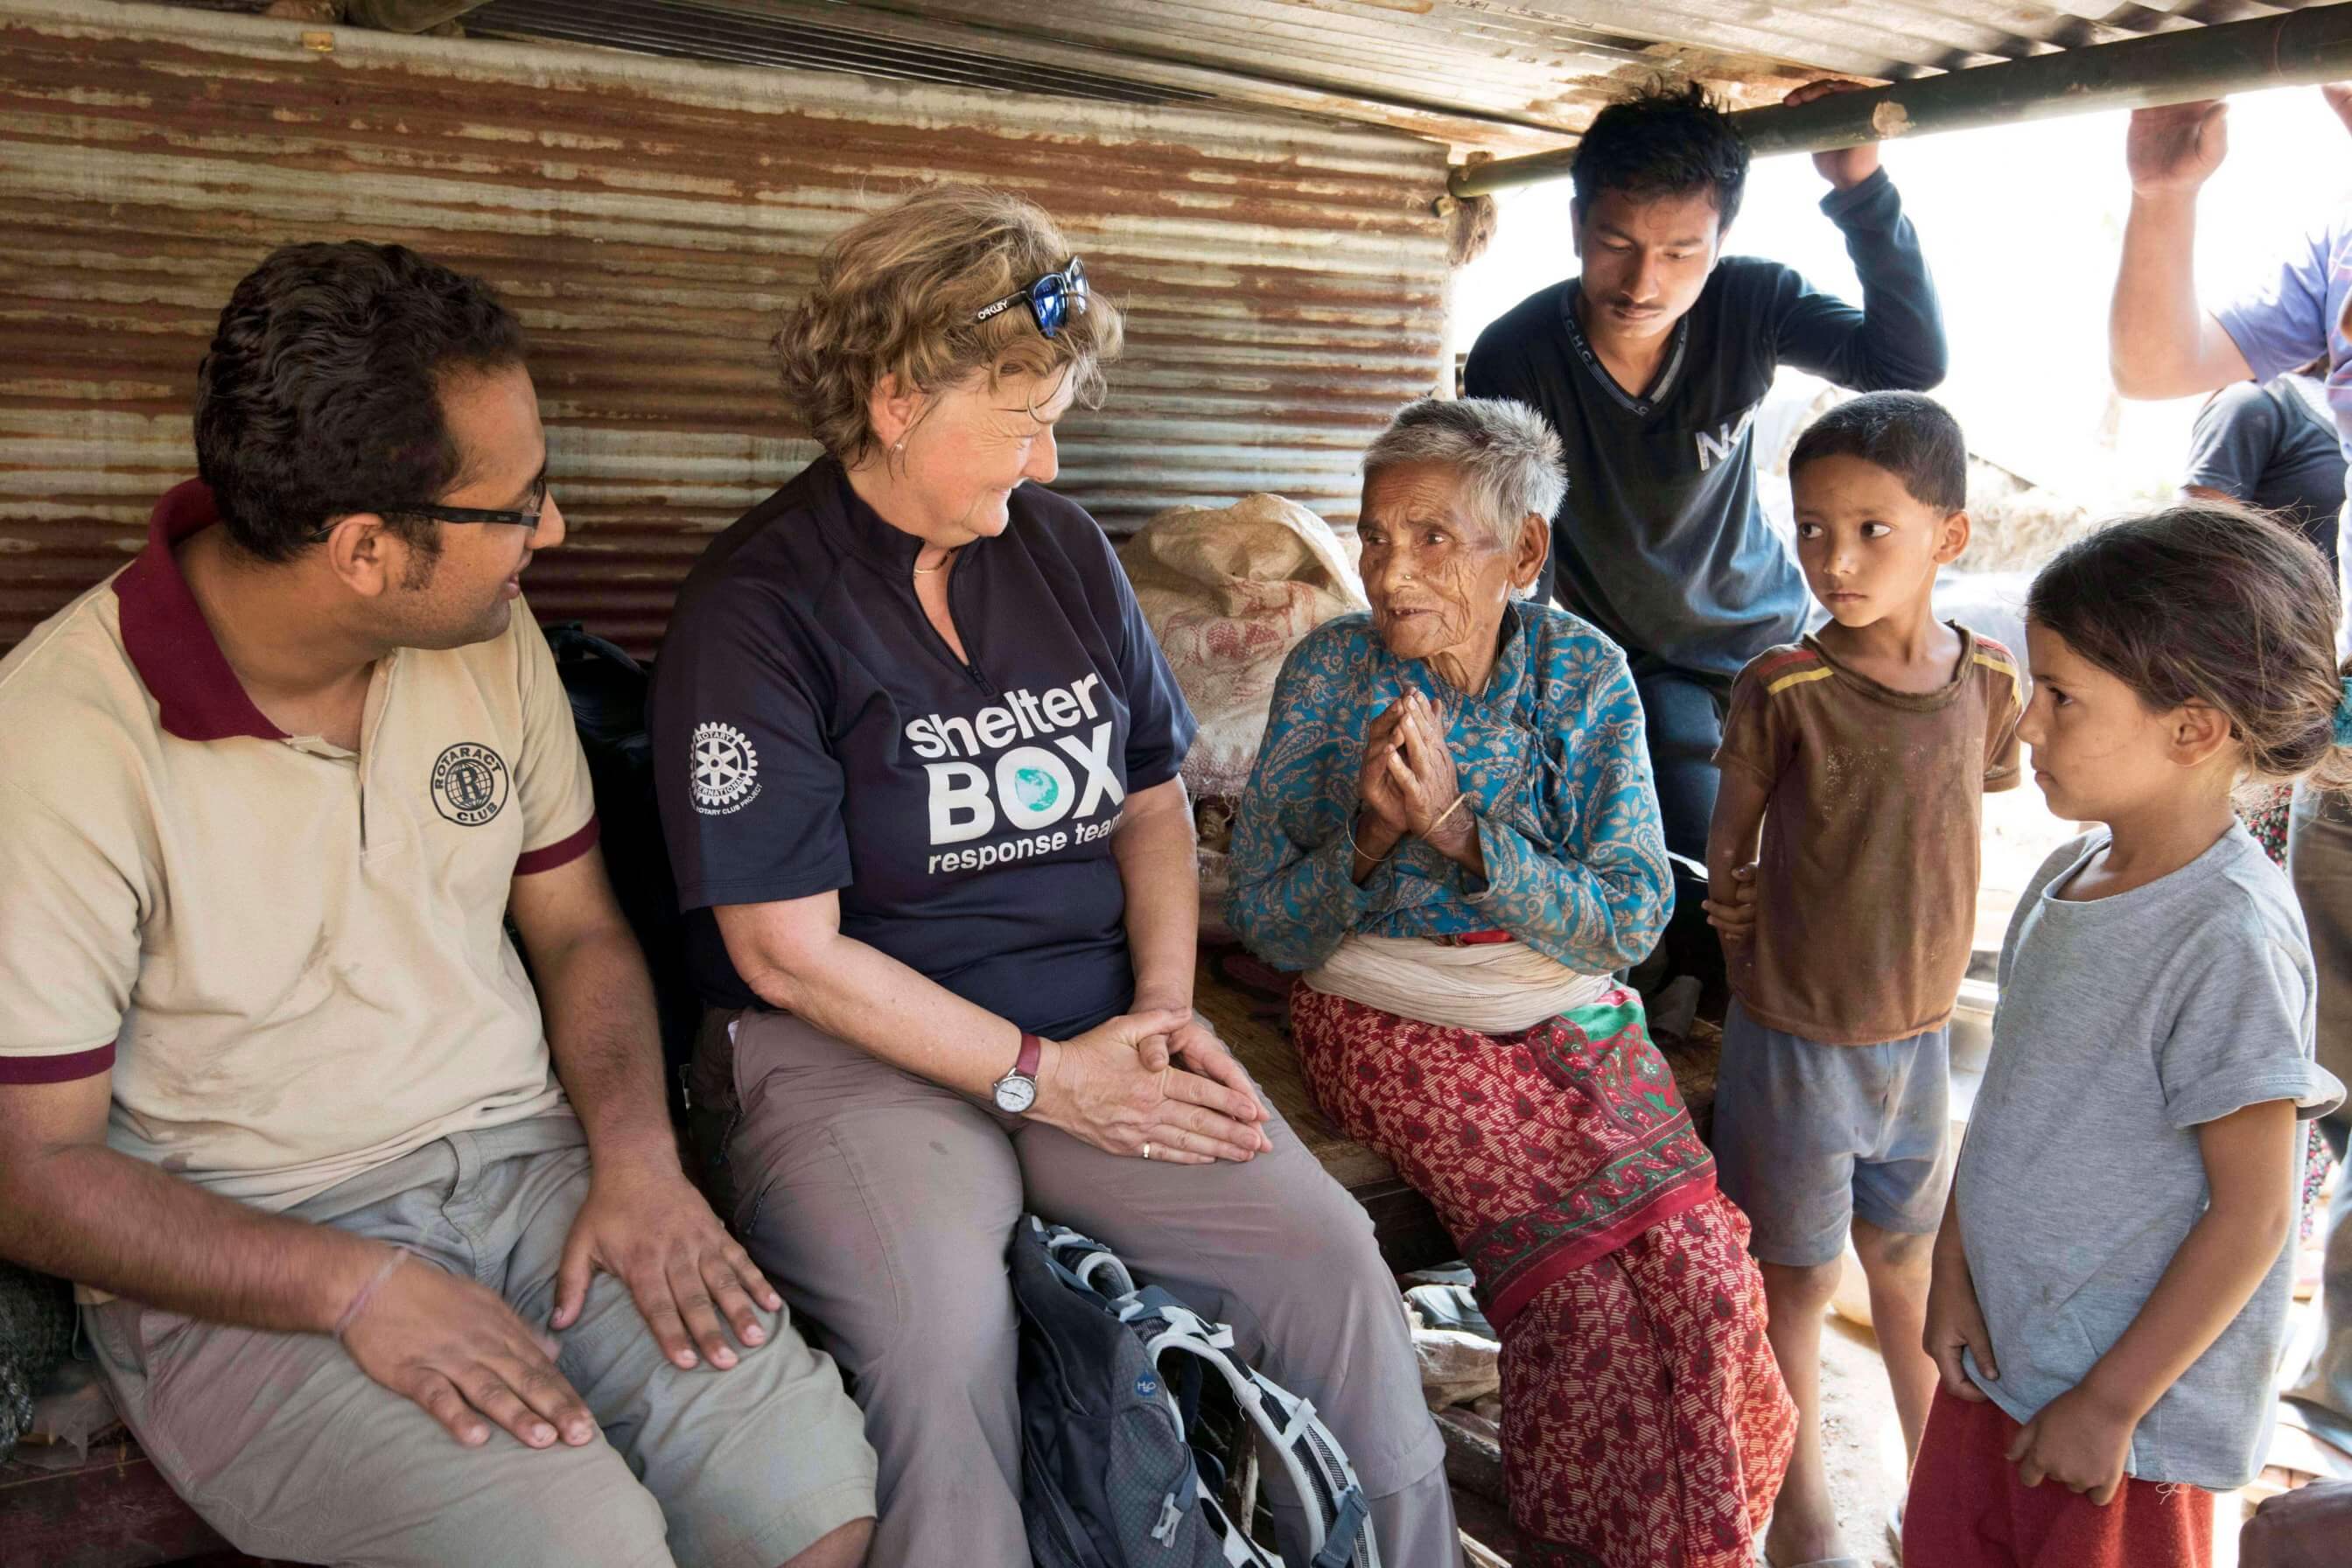 A ShelterBox Response Team member meets with families we supported in Nepal after the earthquake in 2015